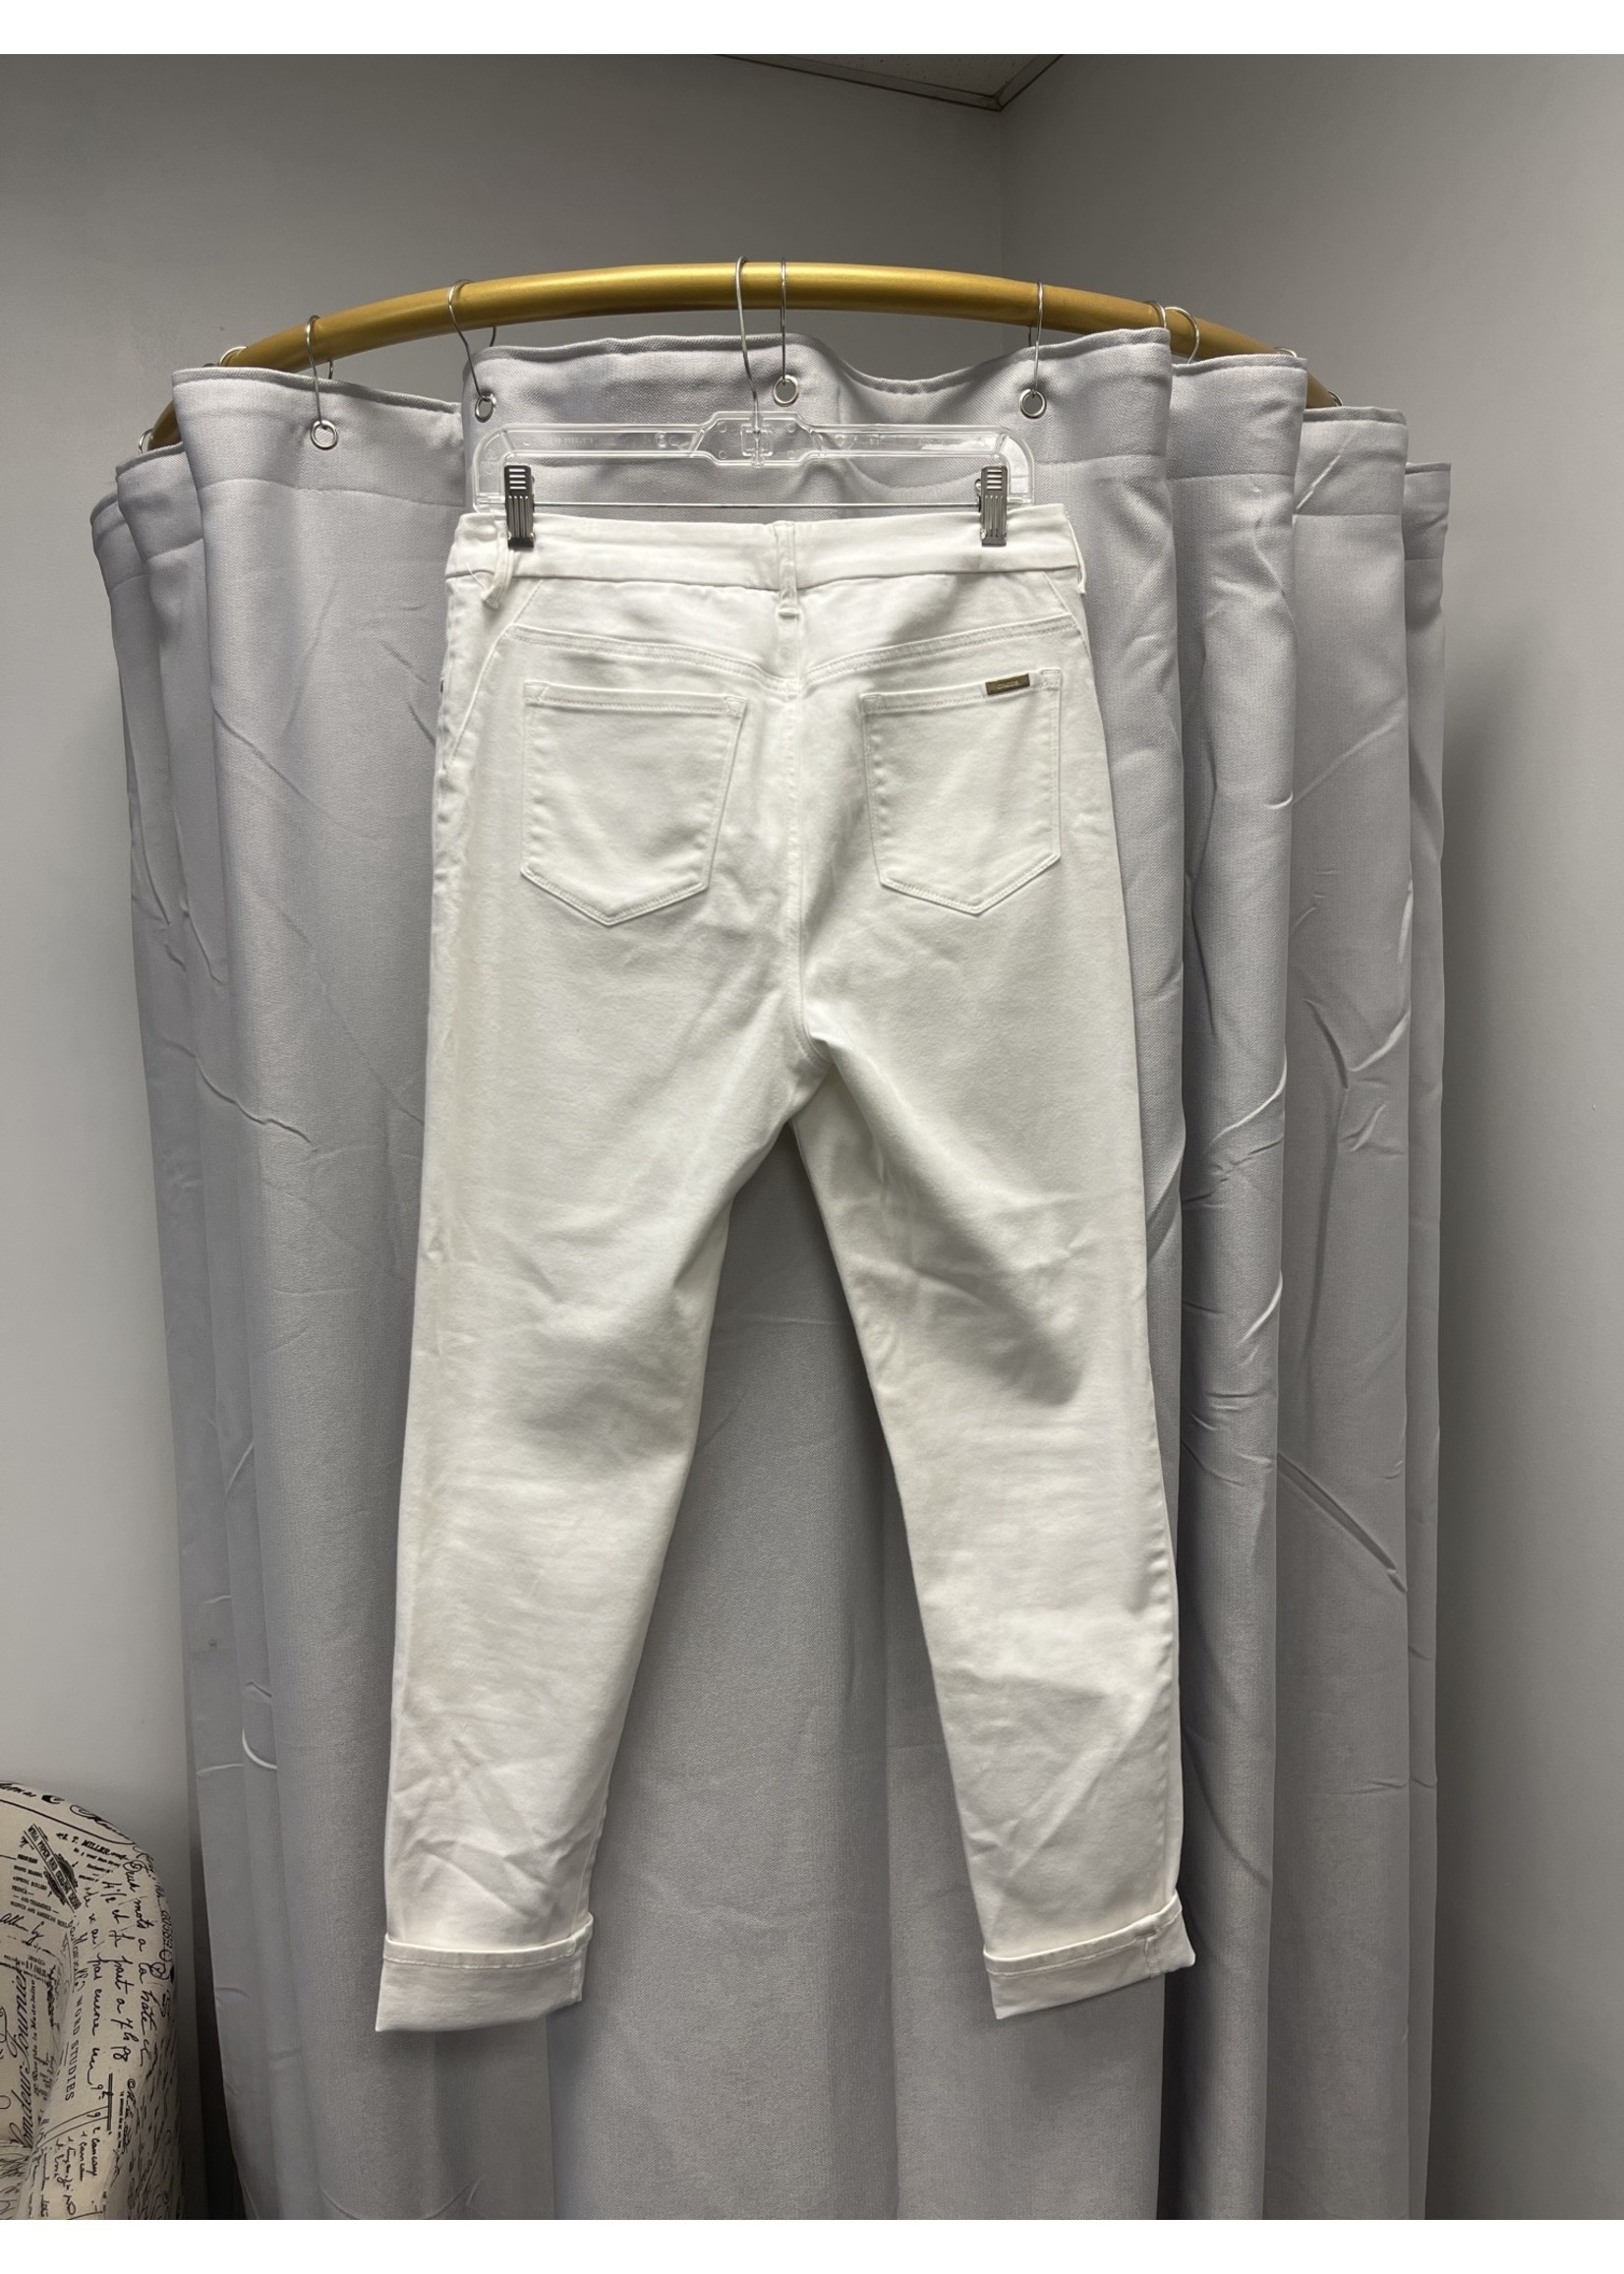 Chico's So Slimming White Denim Pants (1.5) M/10 Pre-owned - Doubletake  Boutique LLC